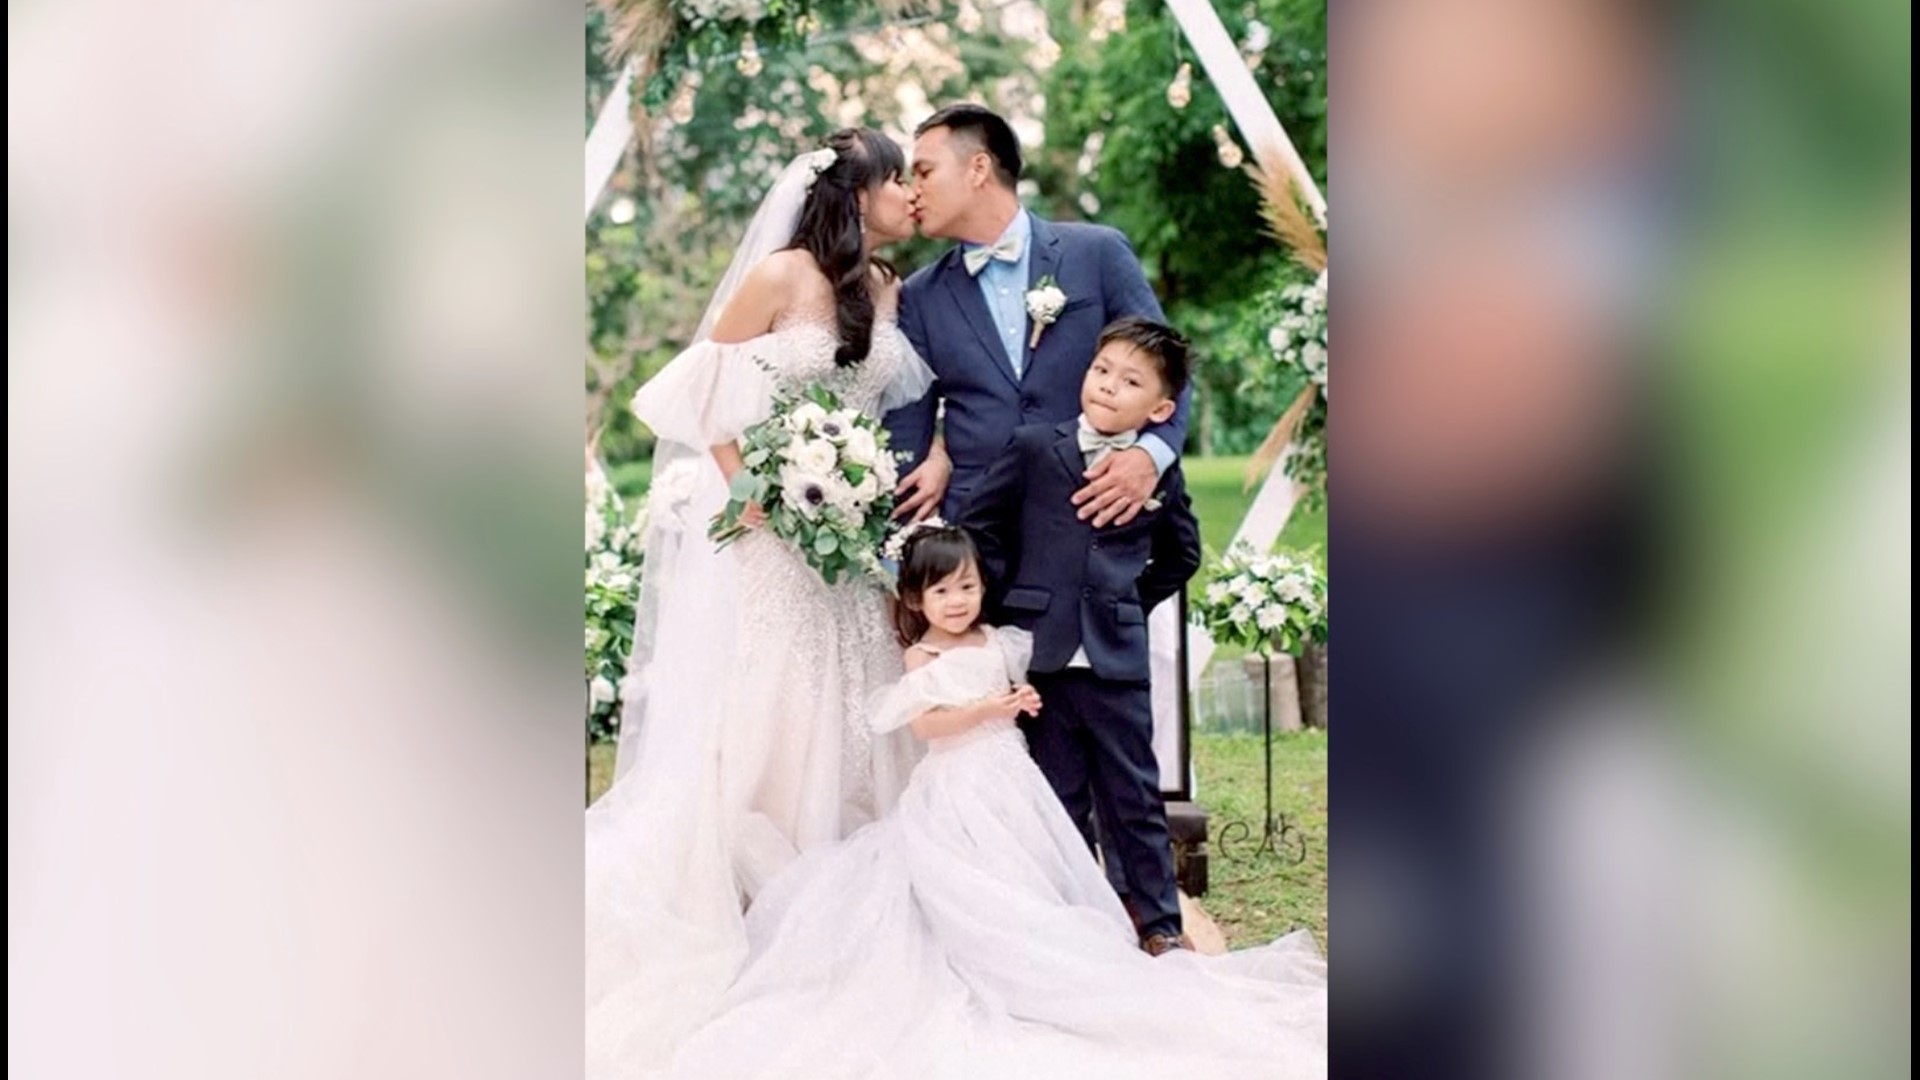 Just because a volcano is erupting, doesn't mean you have to cancel your wedding! This couple got married while Taal erupts. Buzz60's Keri Lumm has more.